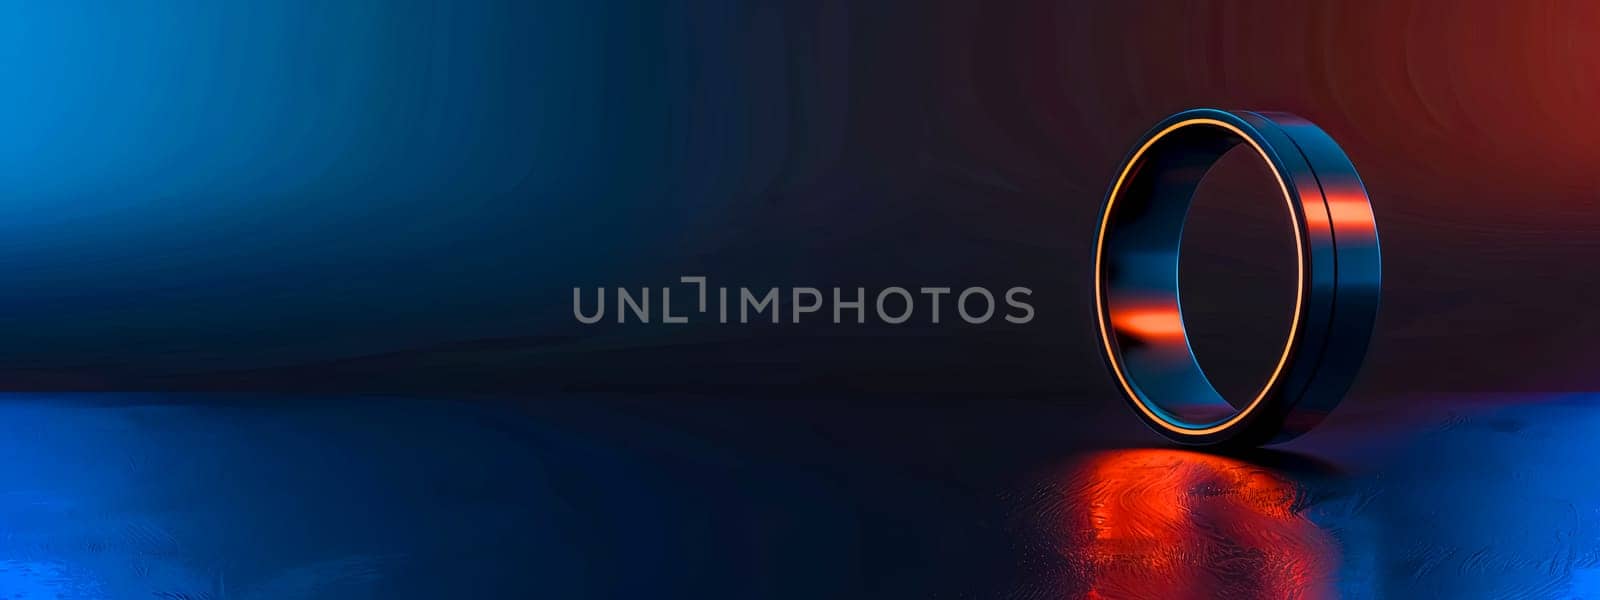 Abstract Blue and Red Gradient Background with Black Ring by Edophoto